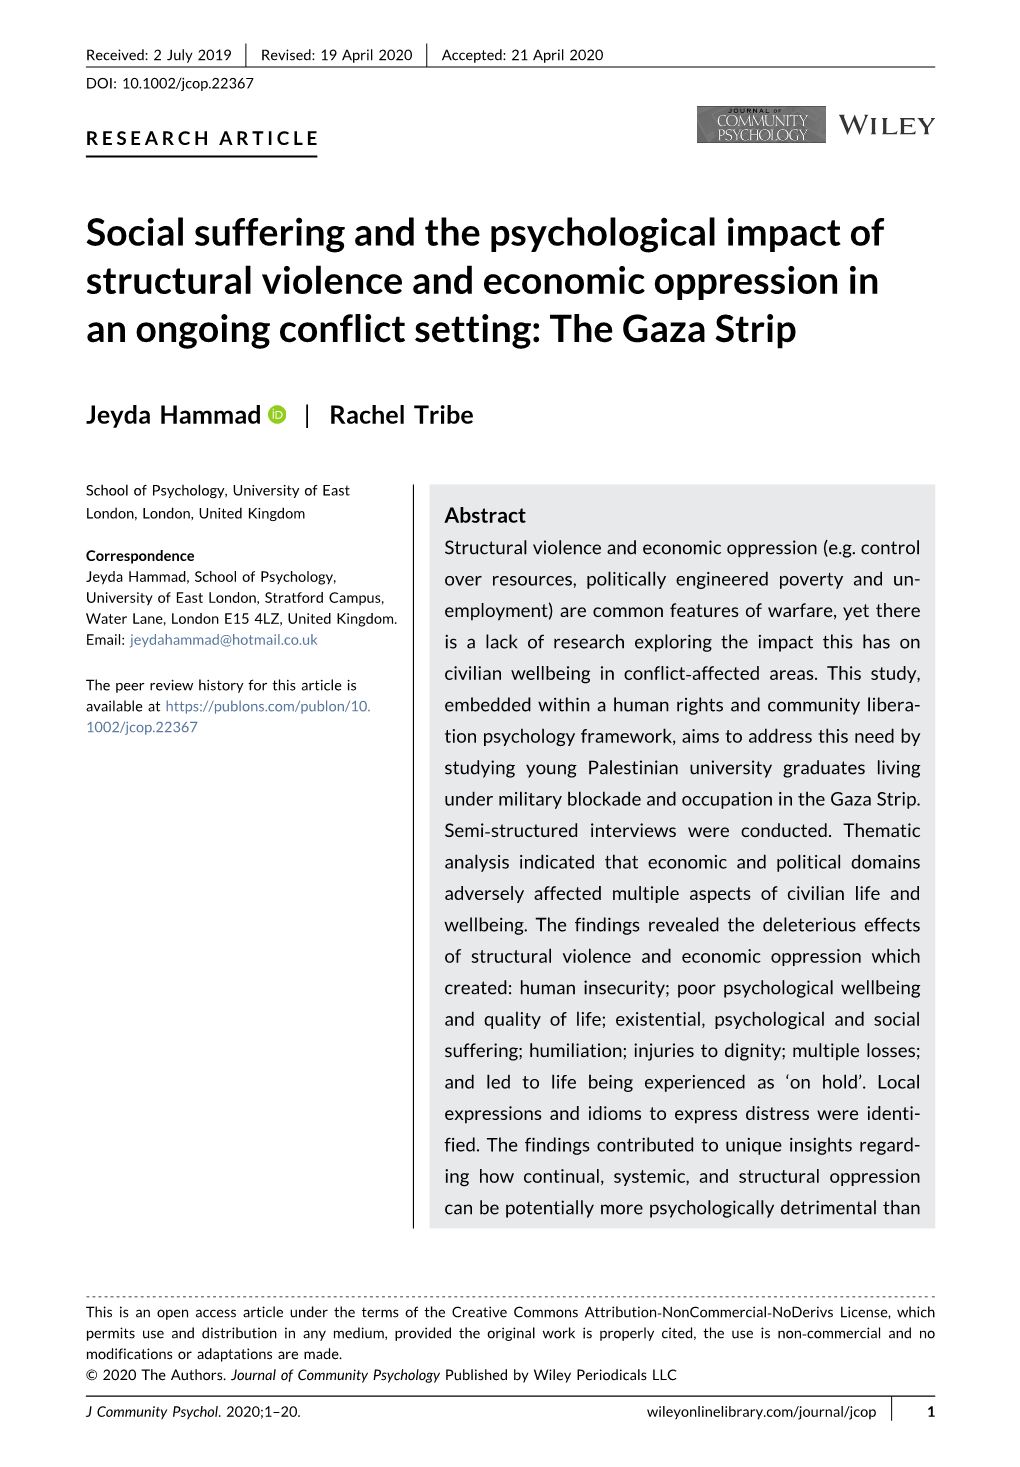 Social Suffering and the Psychological Impact of Structural Violence and Economic Oppression in an Ongoing Conflict Setting: the Gaza Strip